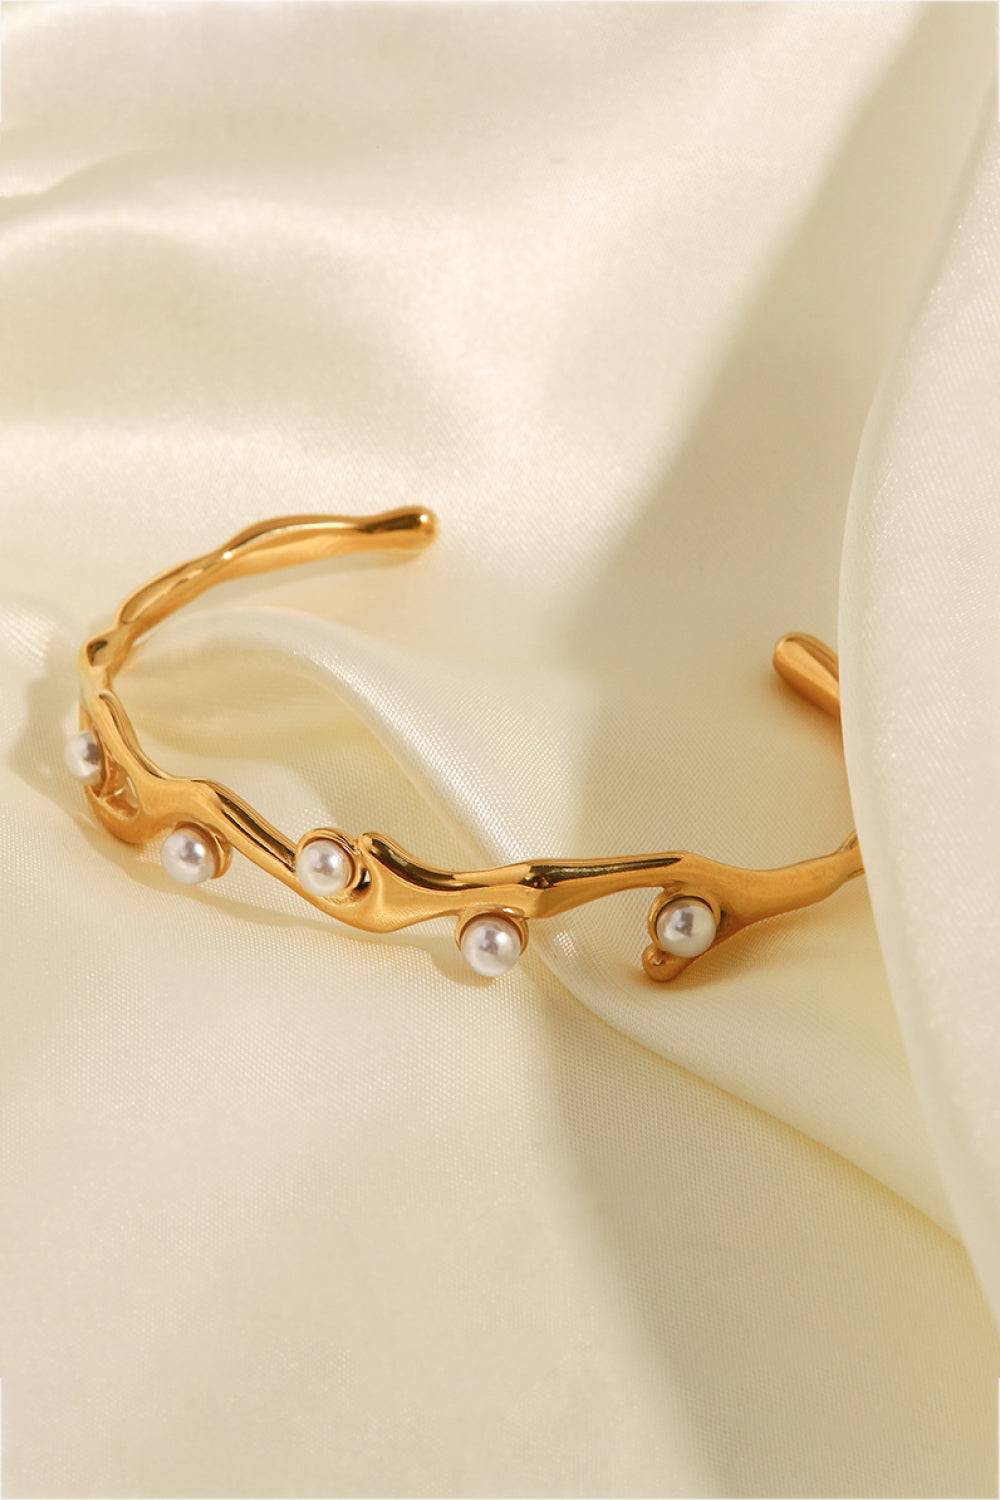 Wheat Inlaid Synthetic Pearl Open Bracelet Sentient Beauty Fashions rings